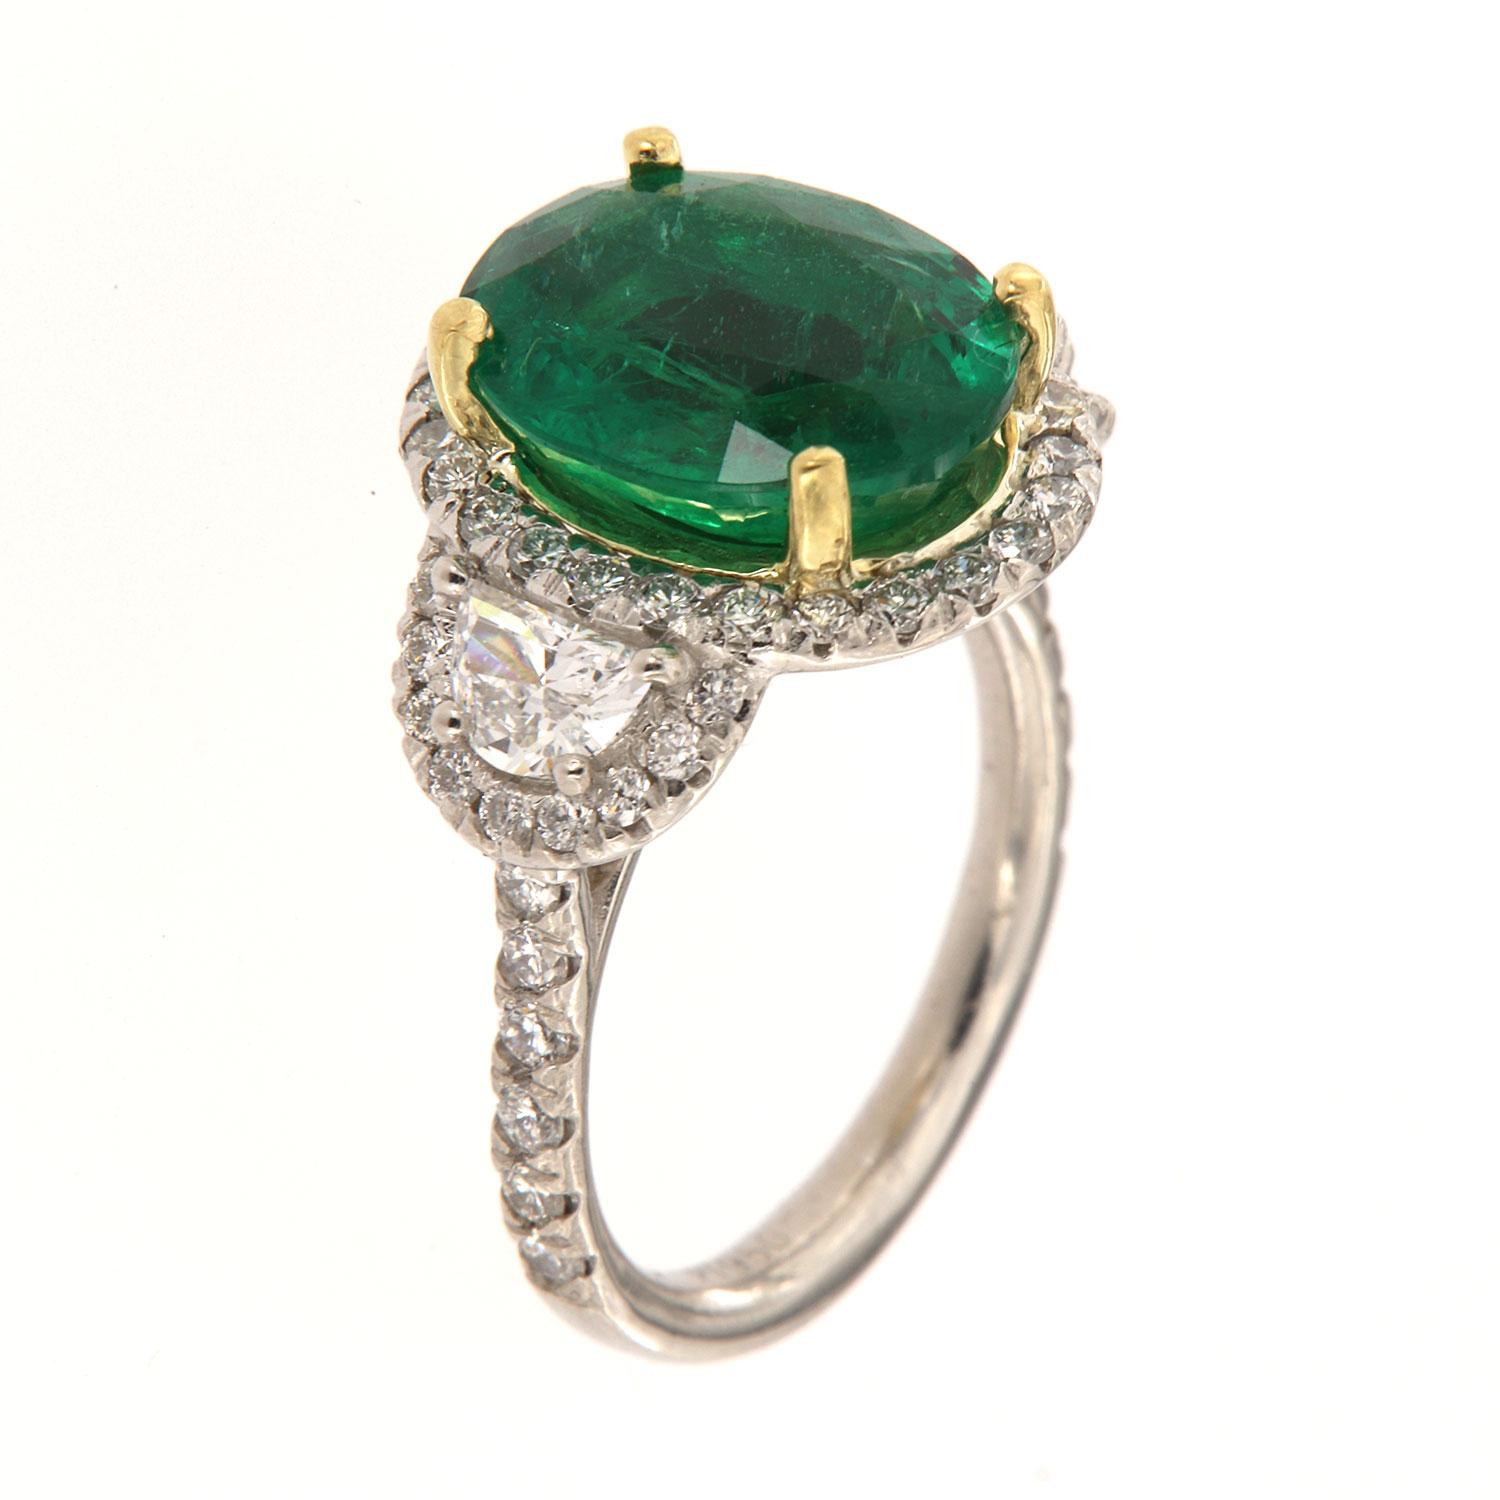 This Platinum and 18K Yellow Gold ring feature a 6.00 Carat Oval shaped Natural Emerald from Zambia in a vibrant green color encircled by a halo of brilliant round diamonds and flanked by two (2) Half-Moon shape diamonds wrapped with delicate